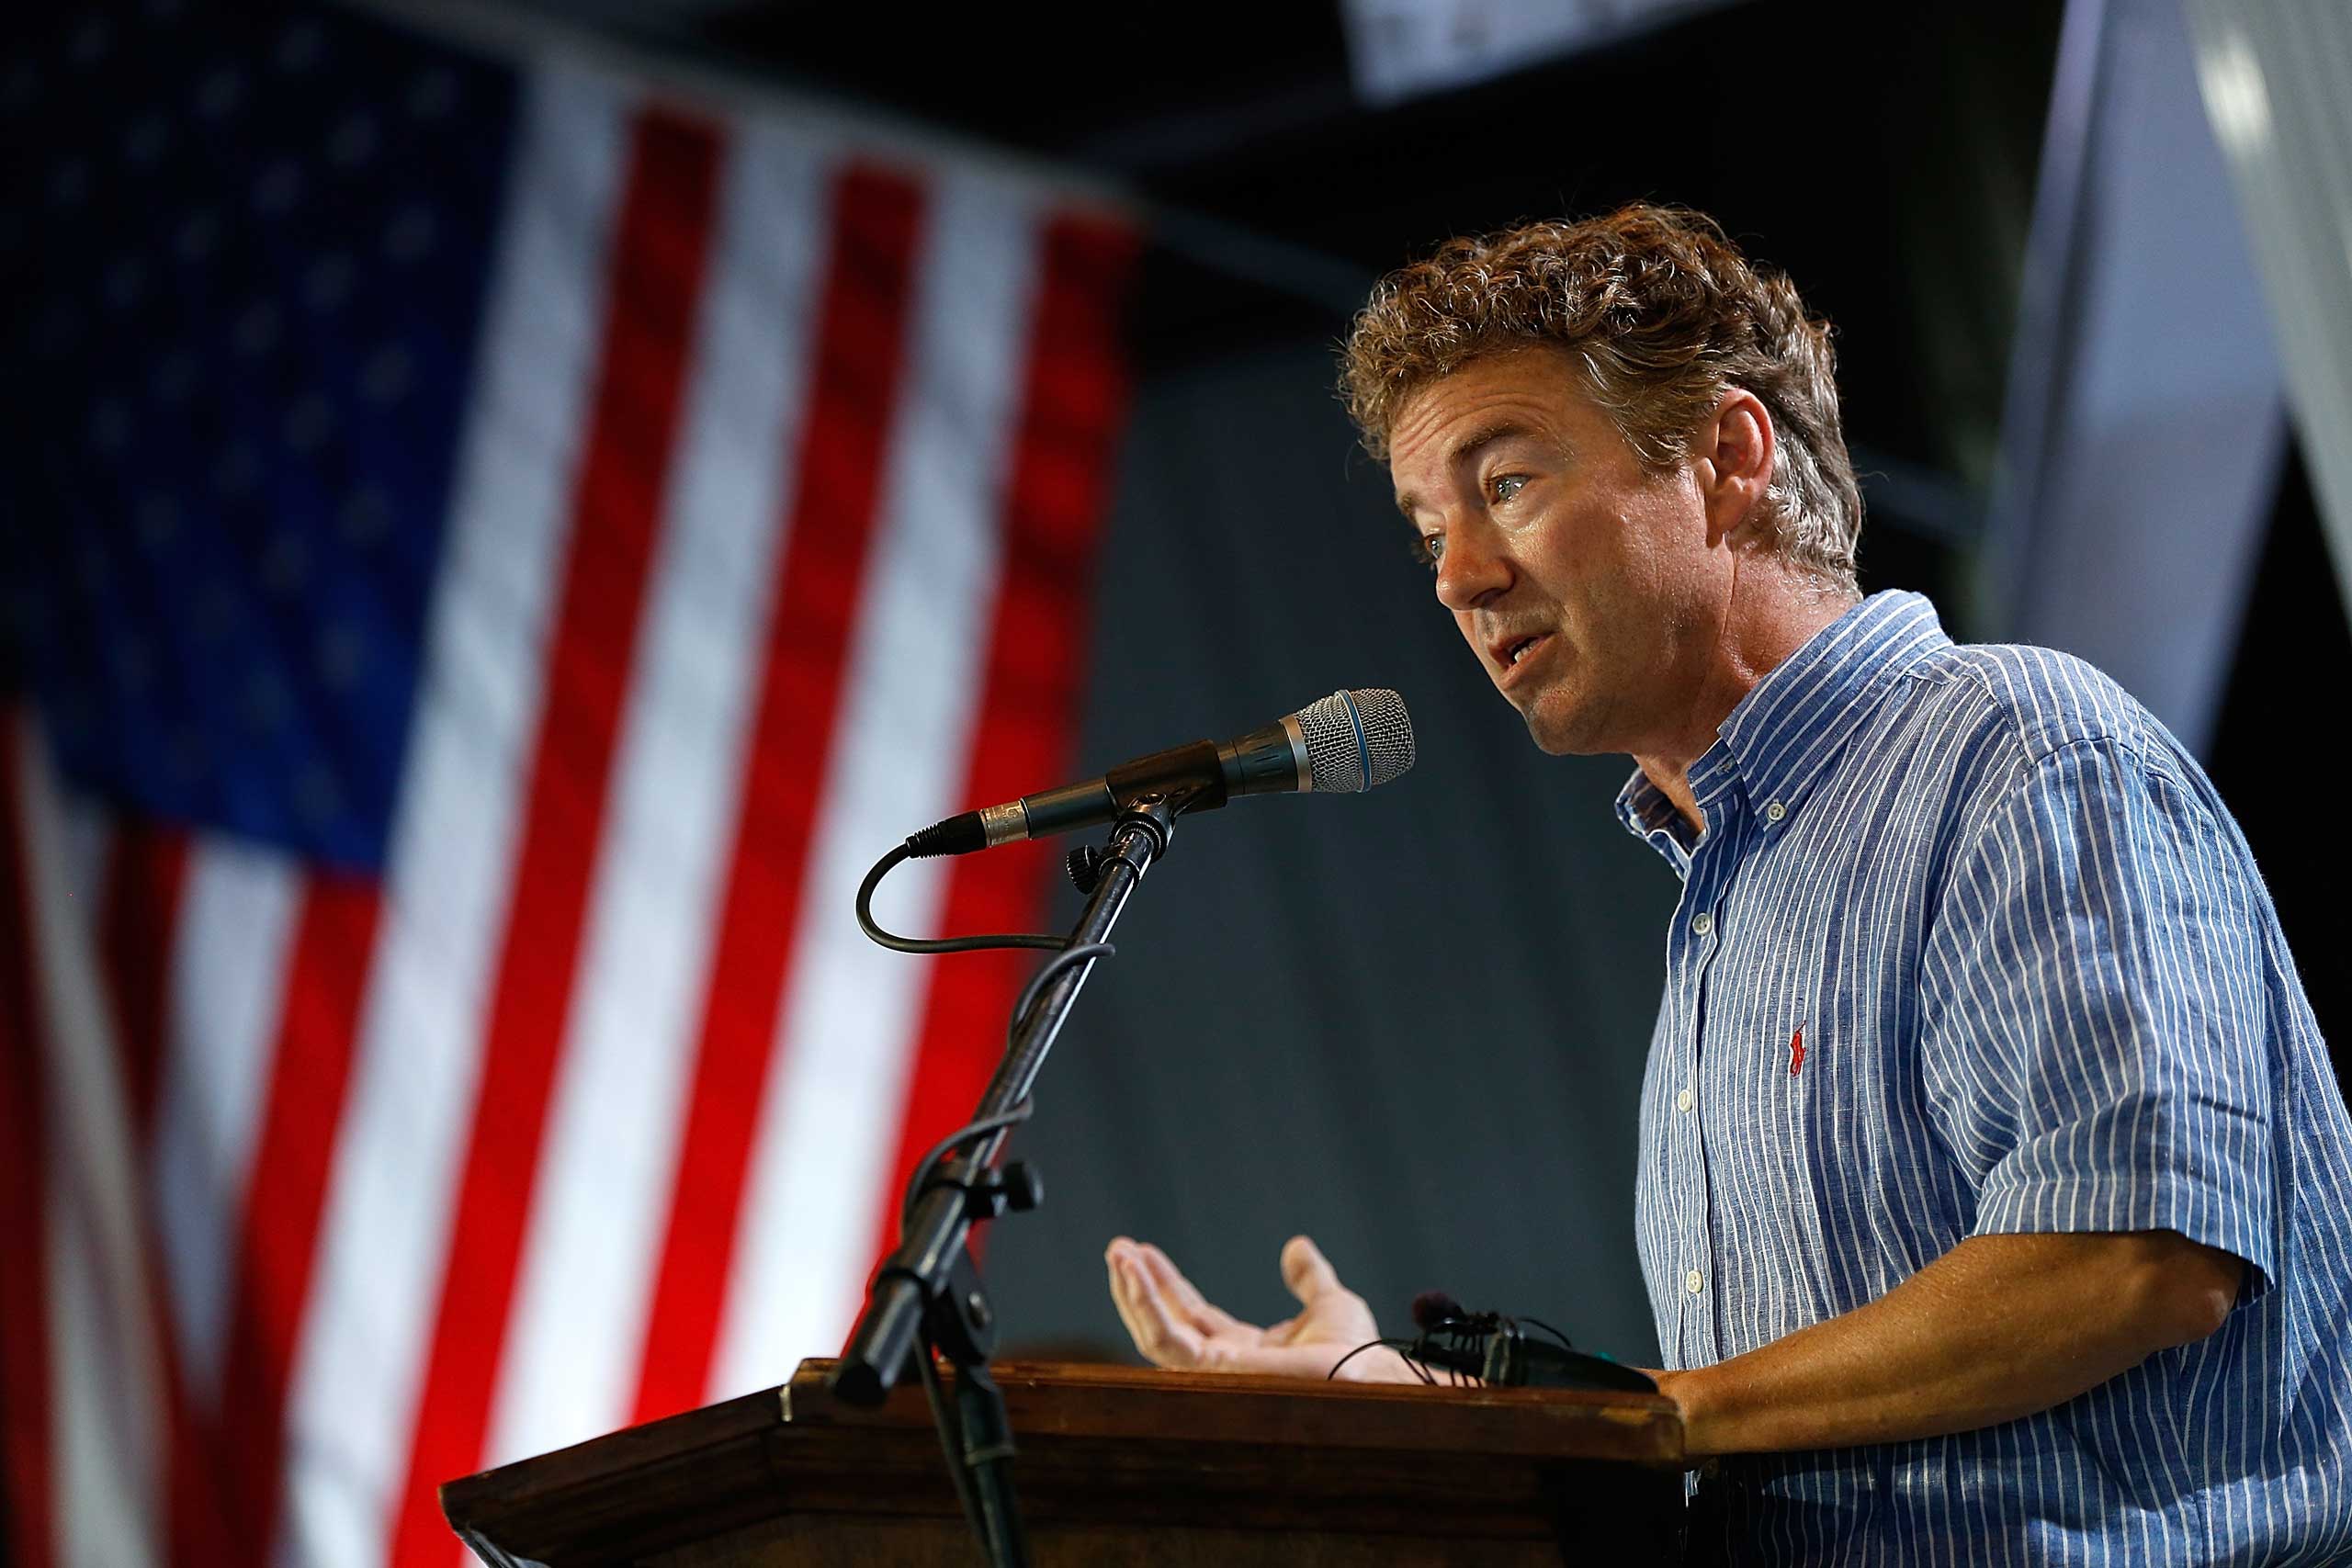 Politicians love to roll up the sleeves on their button-down shirts while out campaigning, but Kentucky Sen. Rand Paul is one of the few to head straight for the short-sleeve shirt when on the stump.